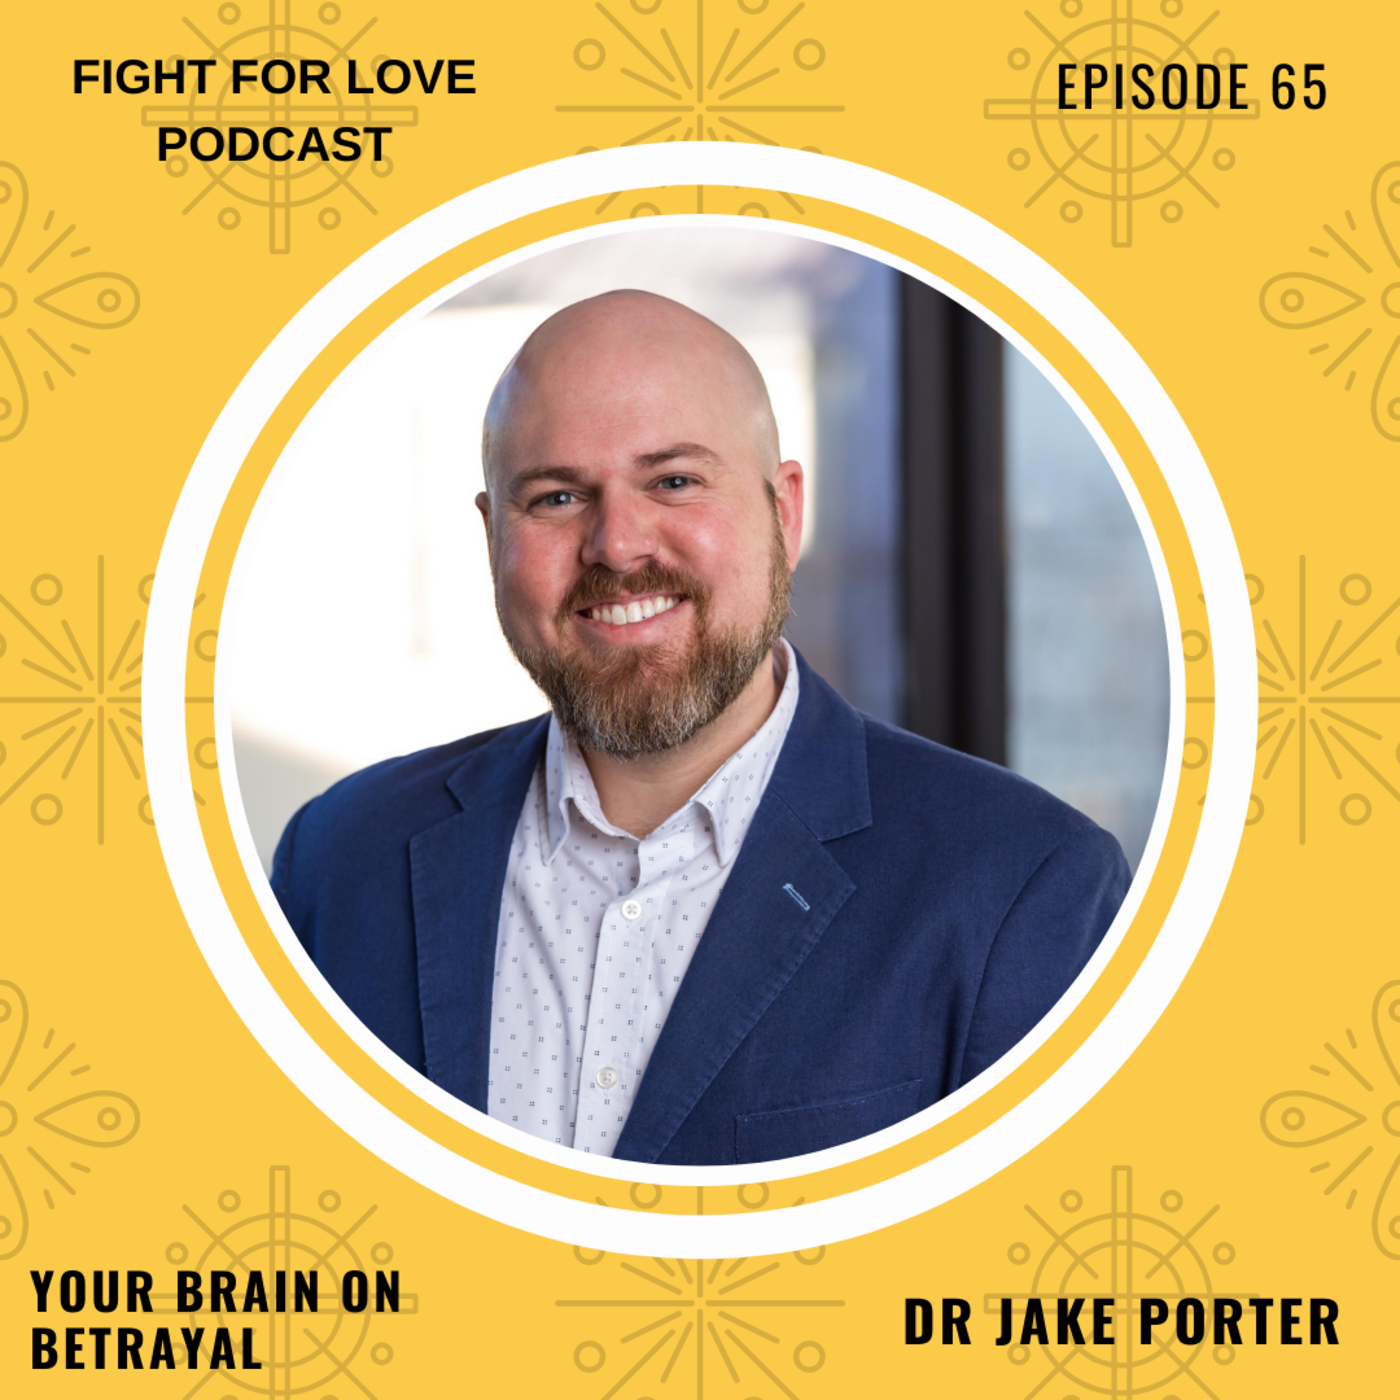 65-your-brain-on-betrayal-with-dr-jake-porter-fight-for-love.png.ebf7973d57919bdd0b5ad50a35fc4cf0